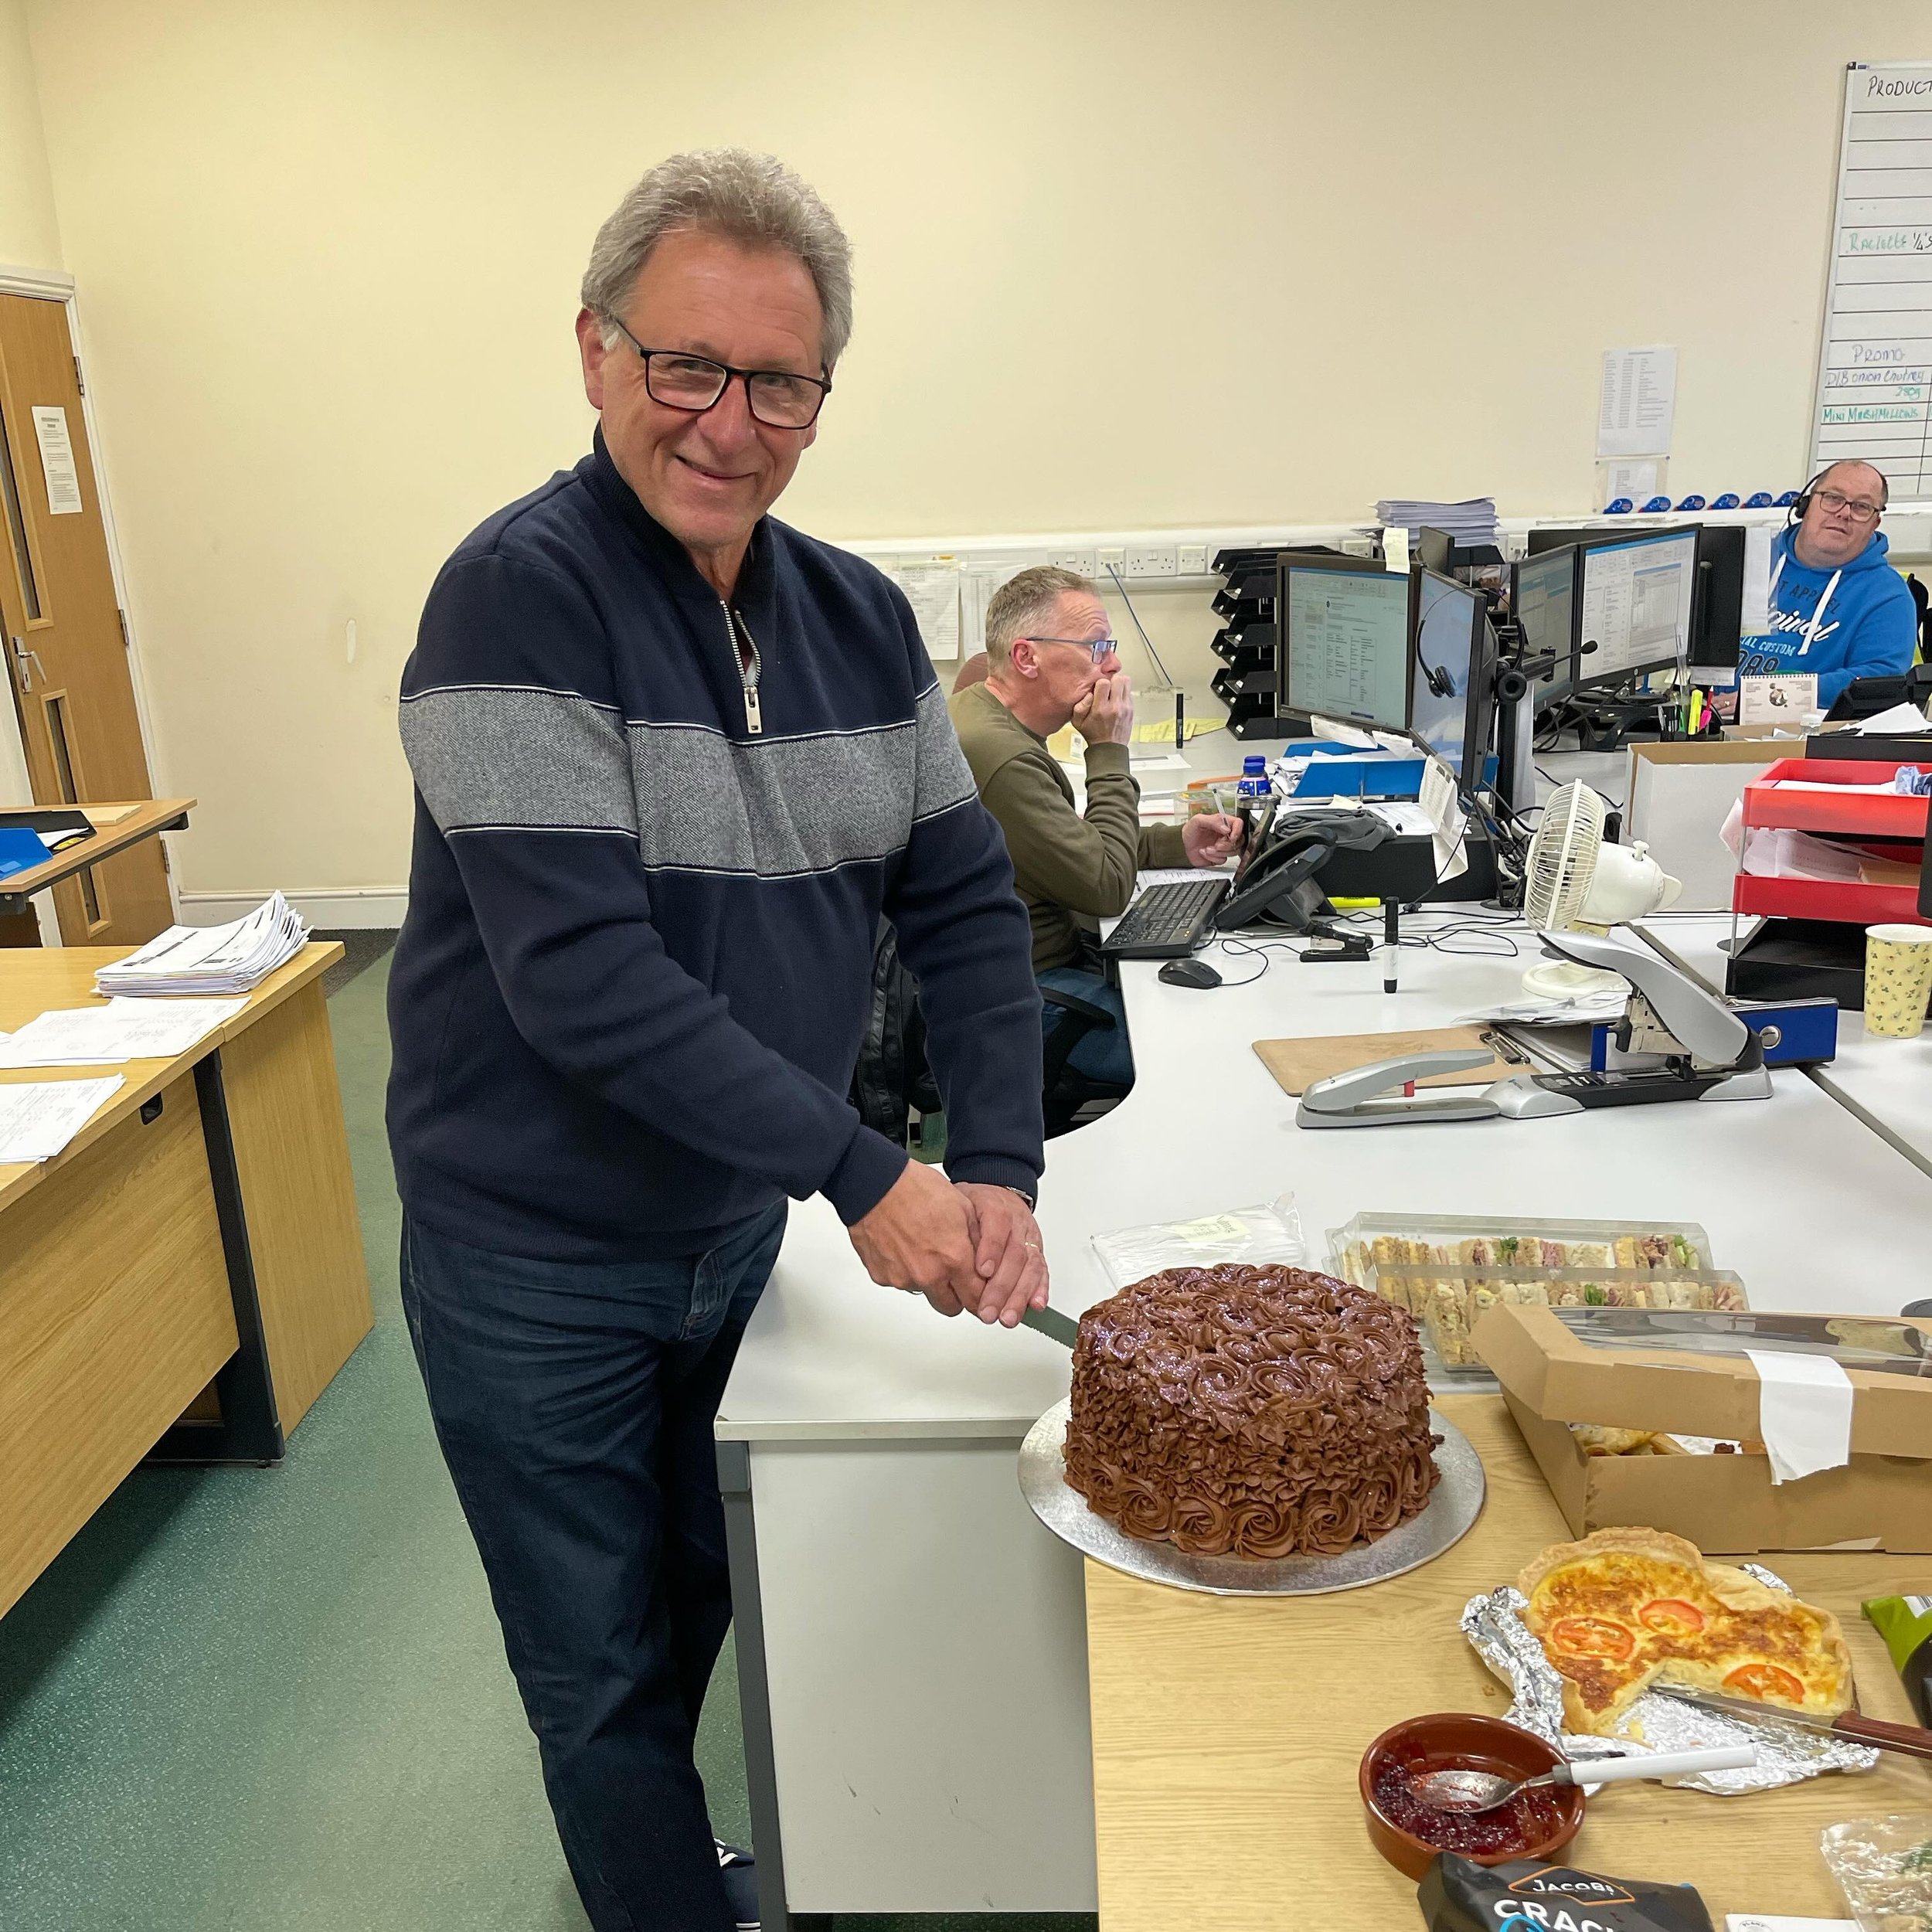 Today we bid a fond farewell to a Longman&rsquo;s legend, Senior Business Development Manager Kevin Groves is retiring after 21 years. He will be greatly missed by all of us here, not only for his sense of humour and kindness as a colleague but also 